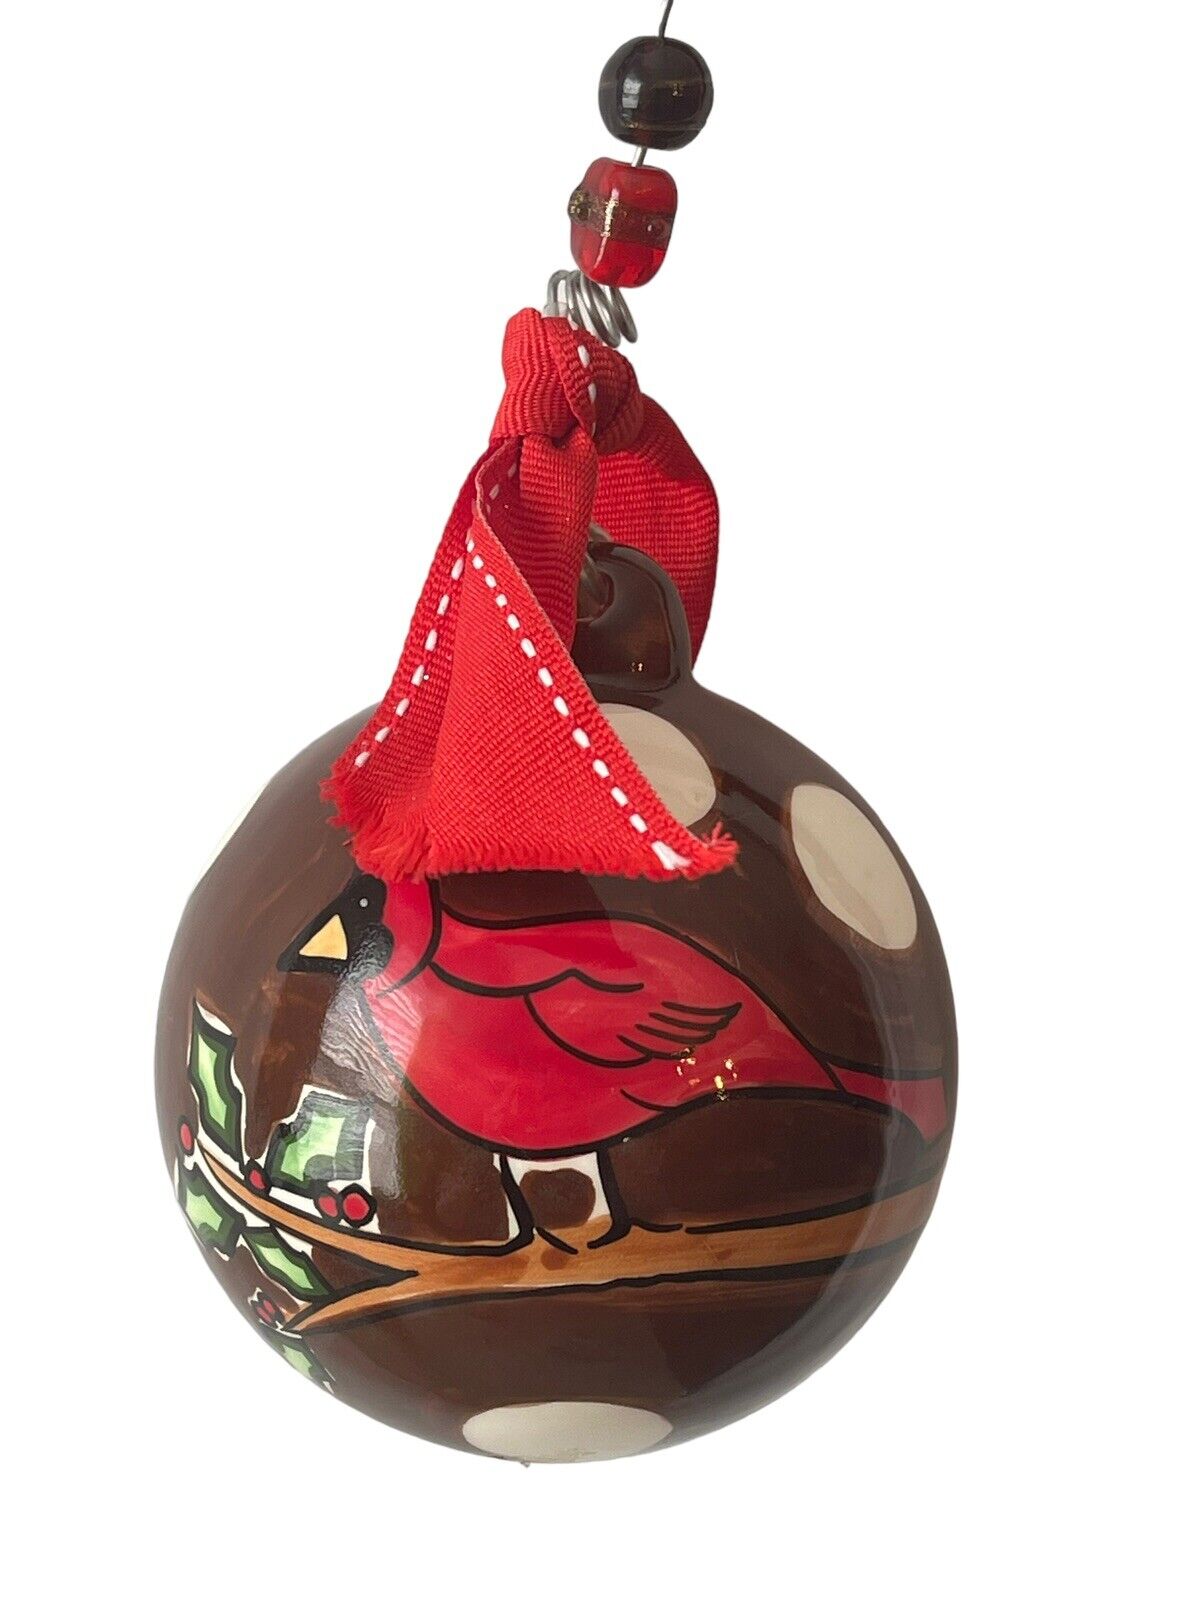 Glory Haus Hand Painted Christmas Ceramic Ornament Red Cardinal